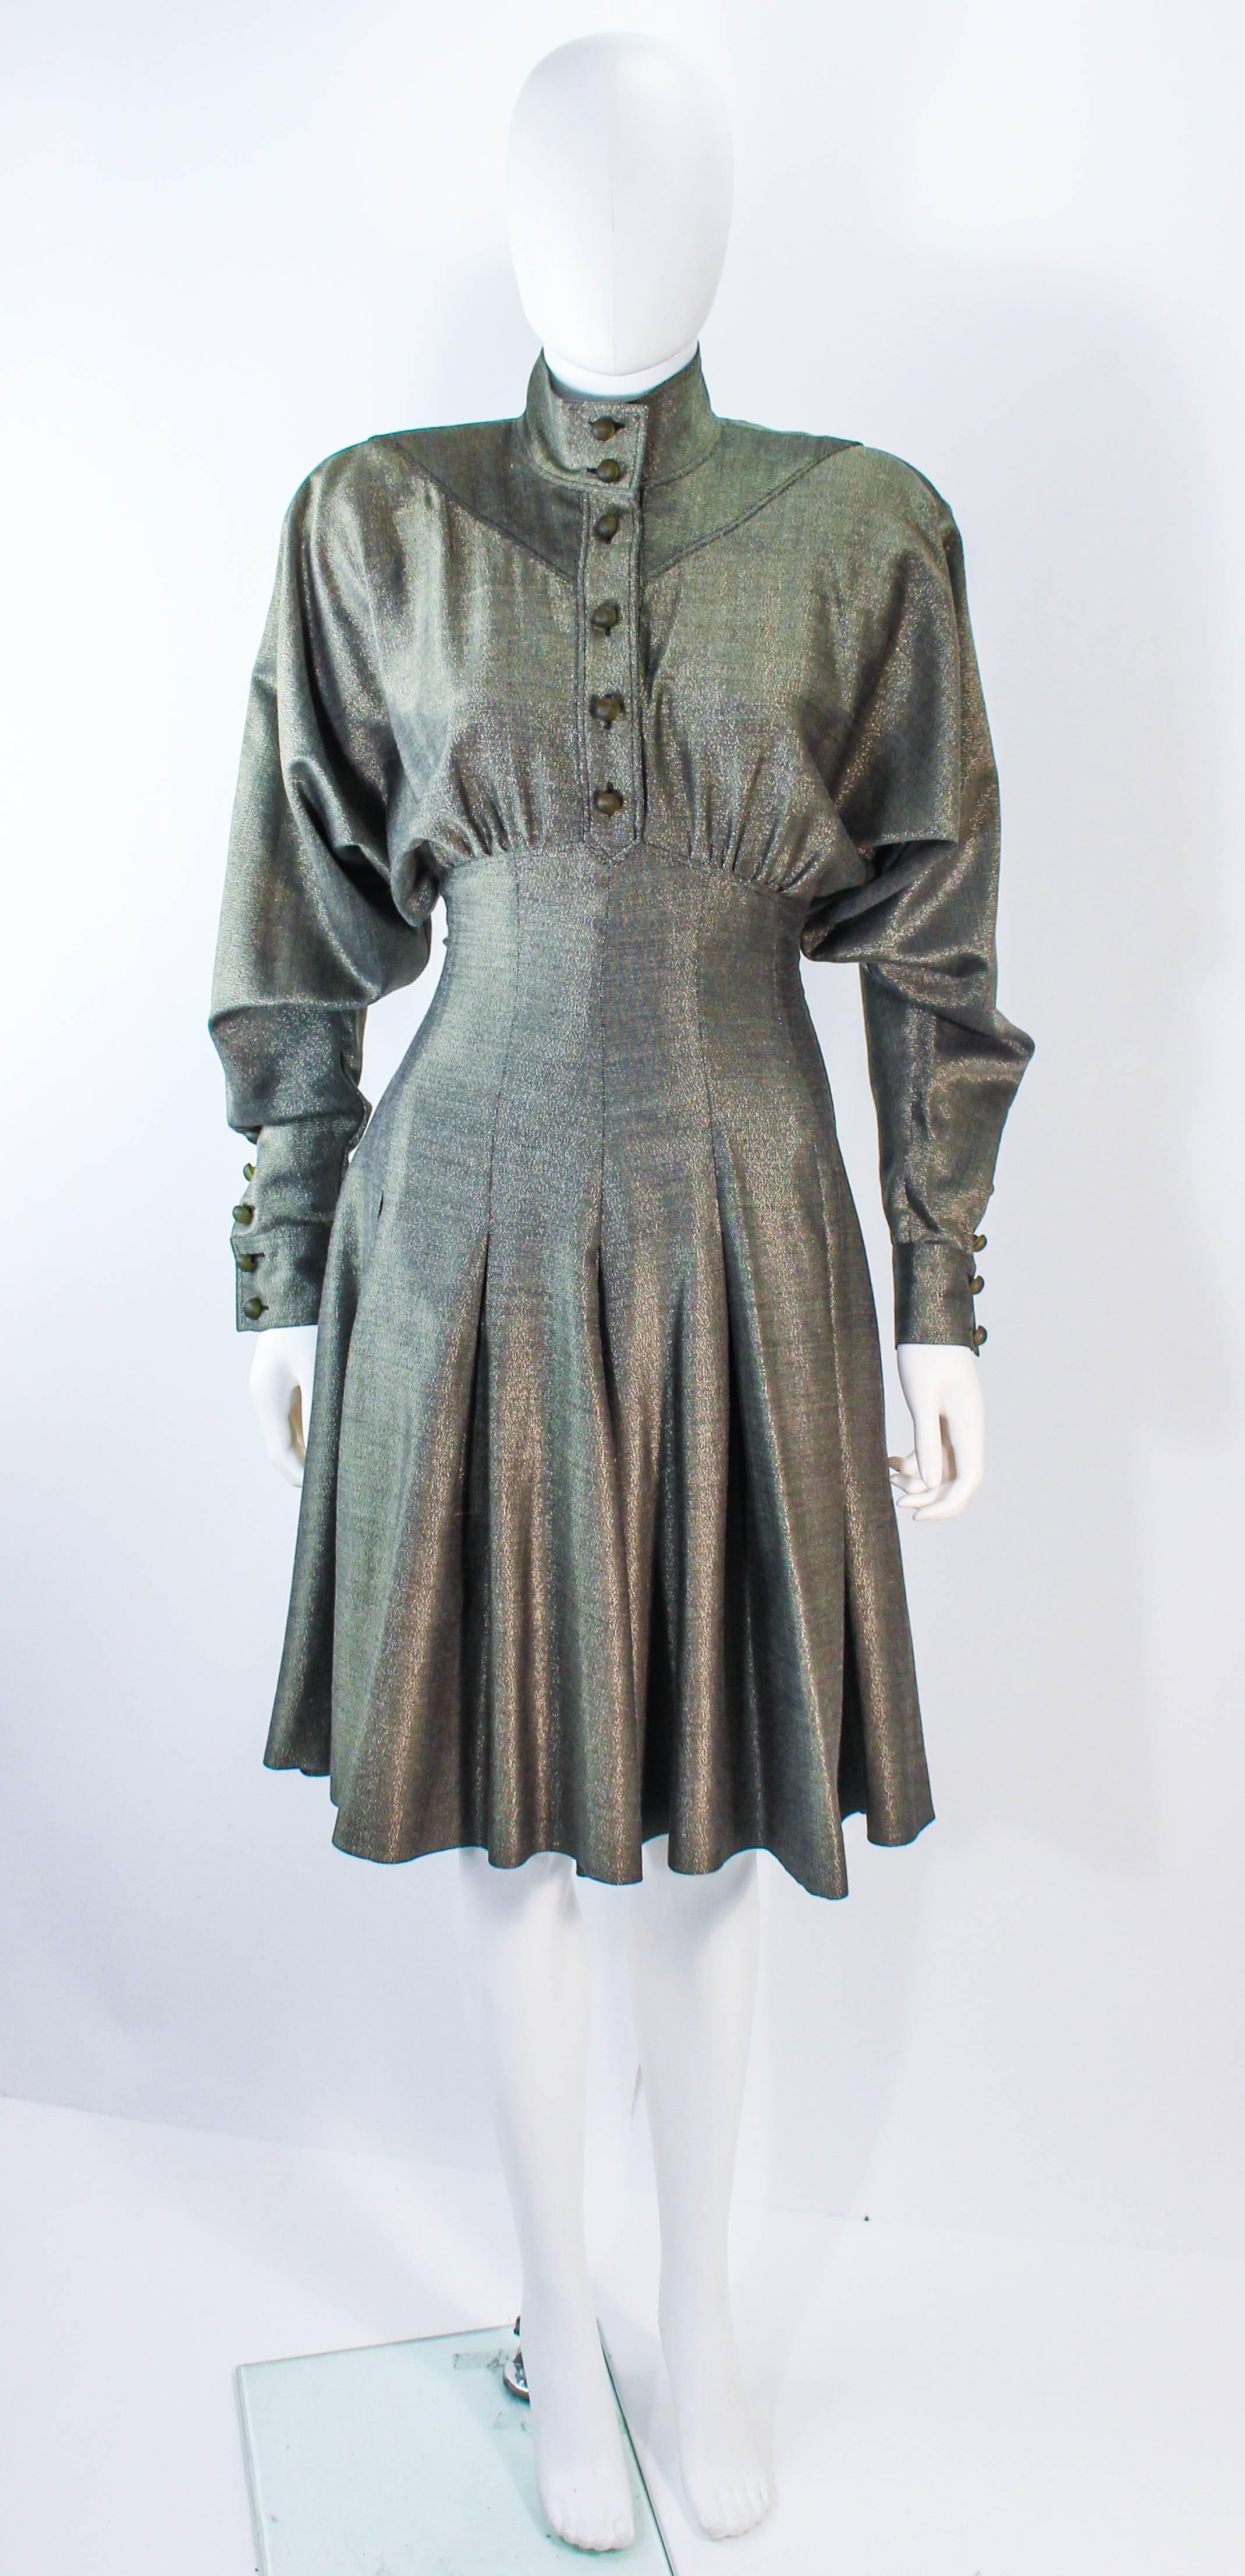 This vintage Fendi dress is composed of a gold and black gunmetal metallic fabric. Features a bat wing design with shoulder pads (can be removed) and a pleated skirt. There is a side zipper closure with center front buttons and buttons at the cuffs.